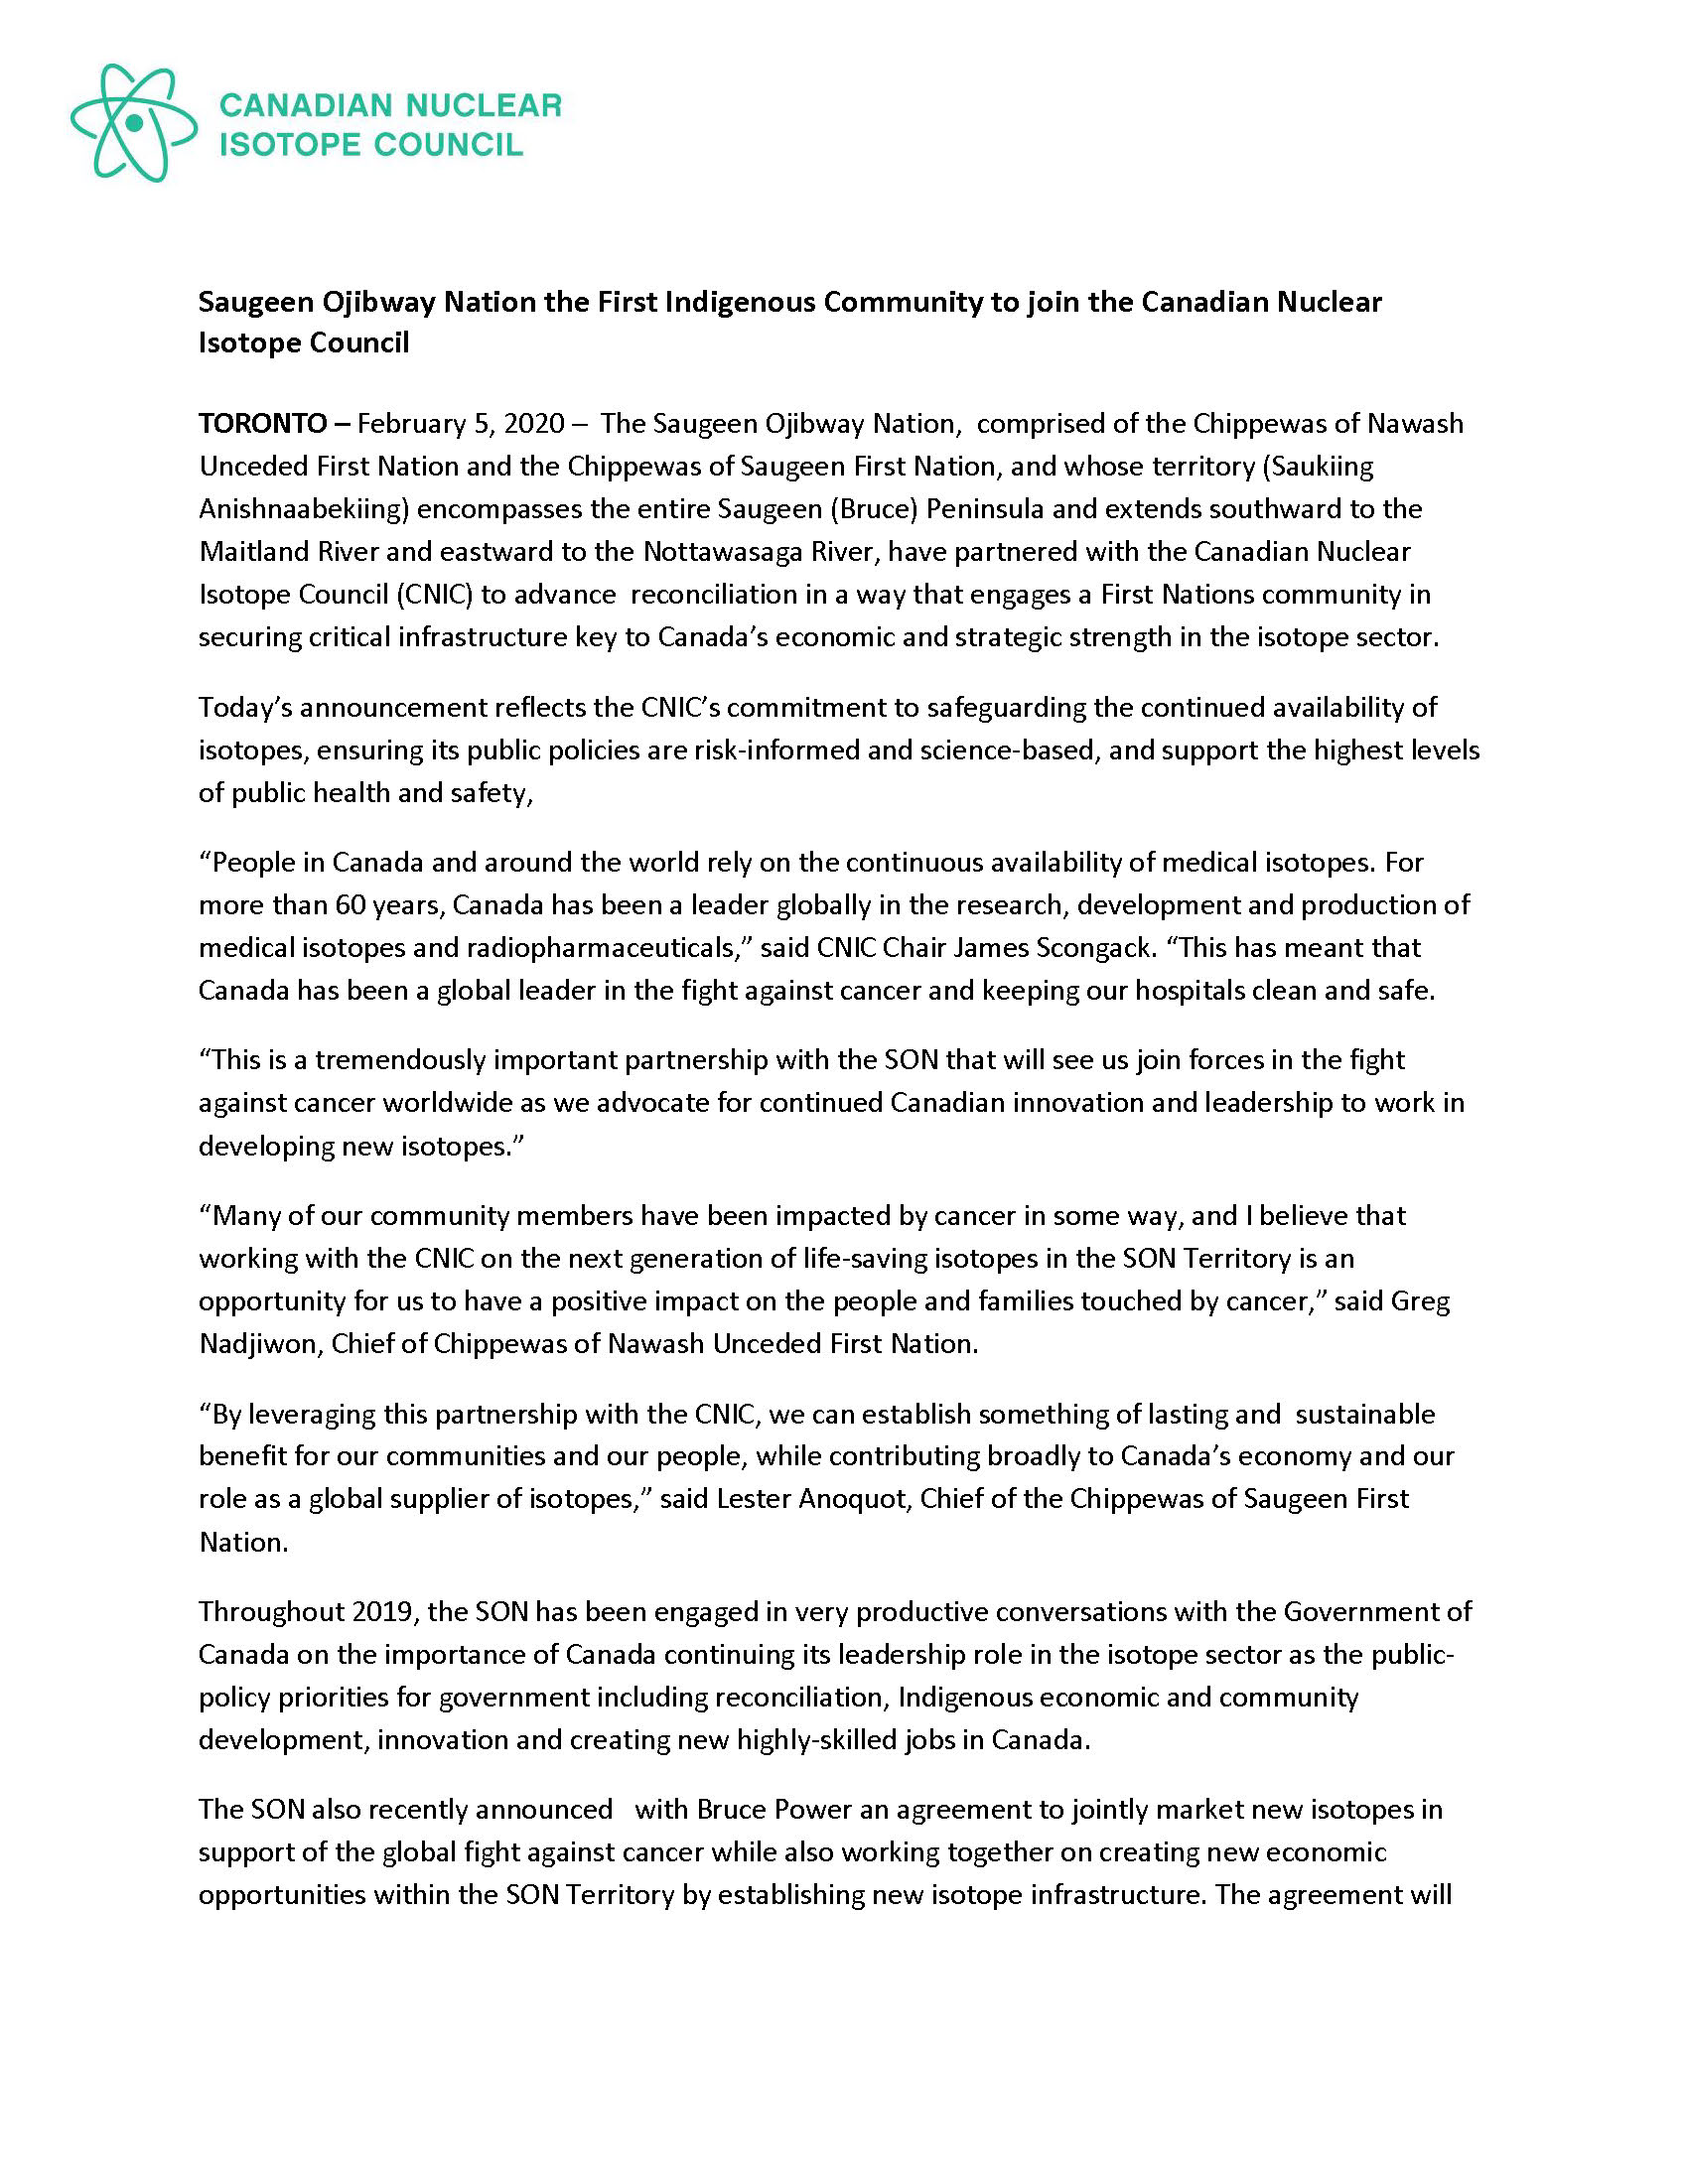 Nuclear Innovation Council press release page 1